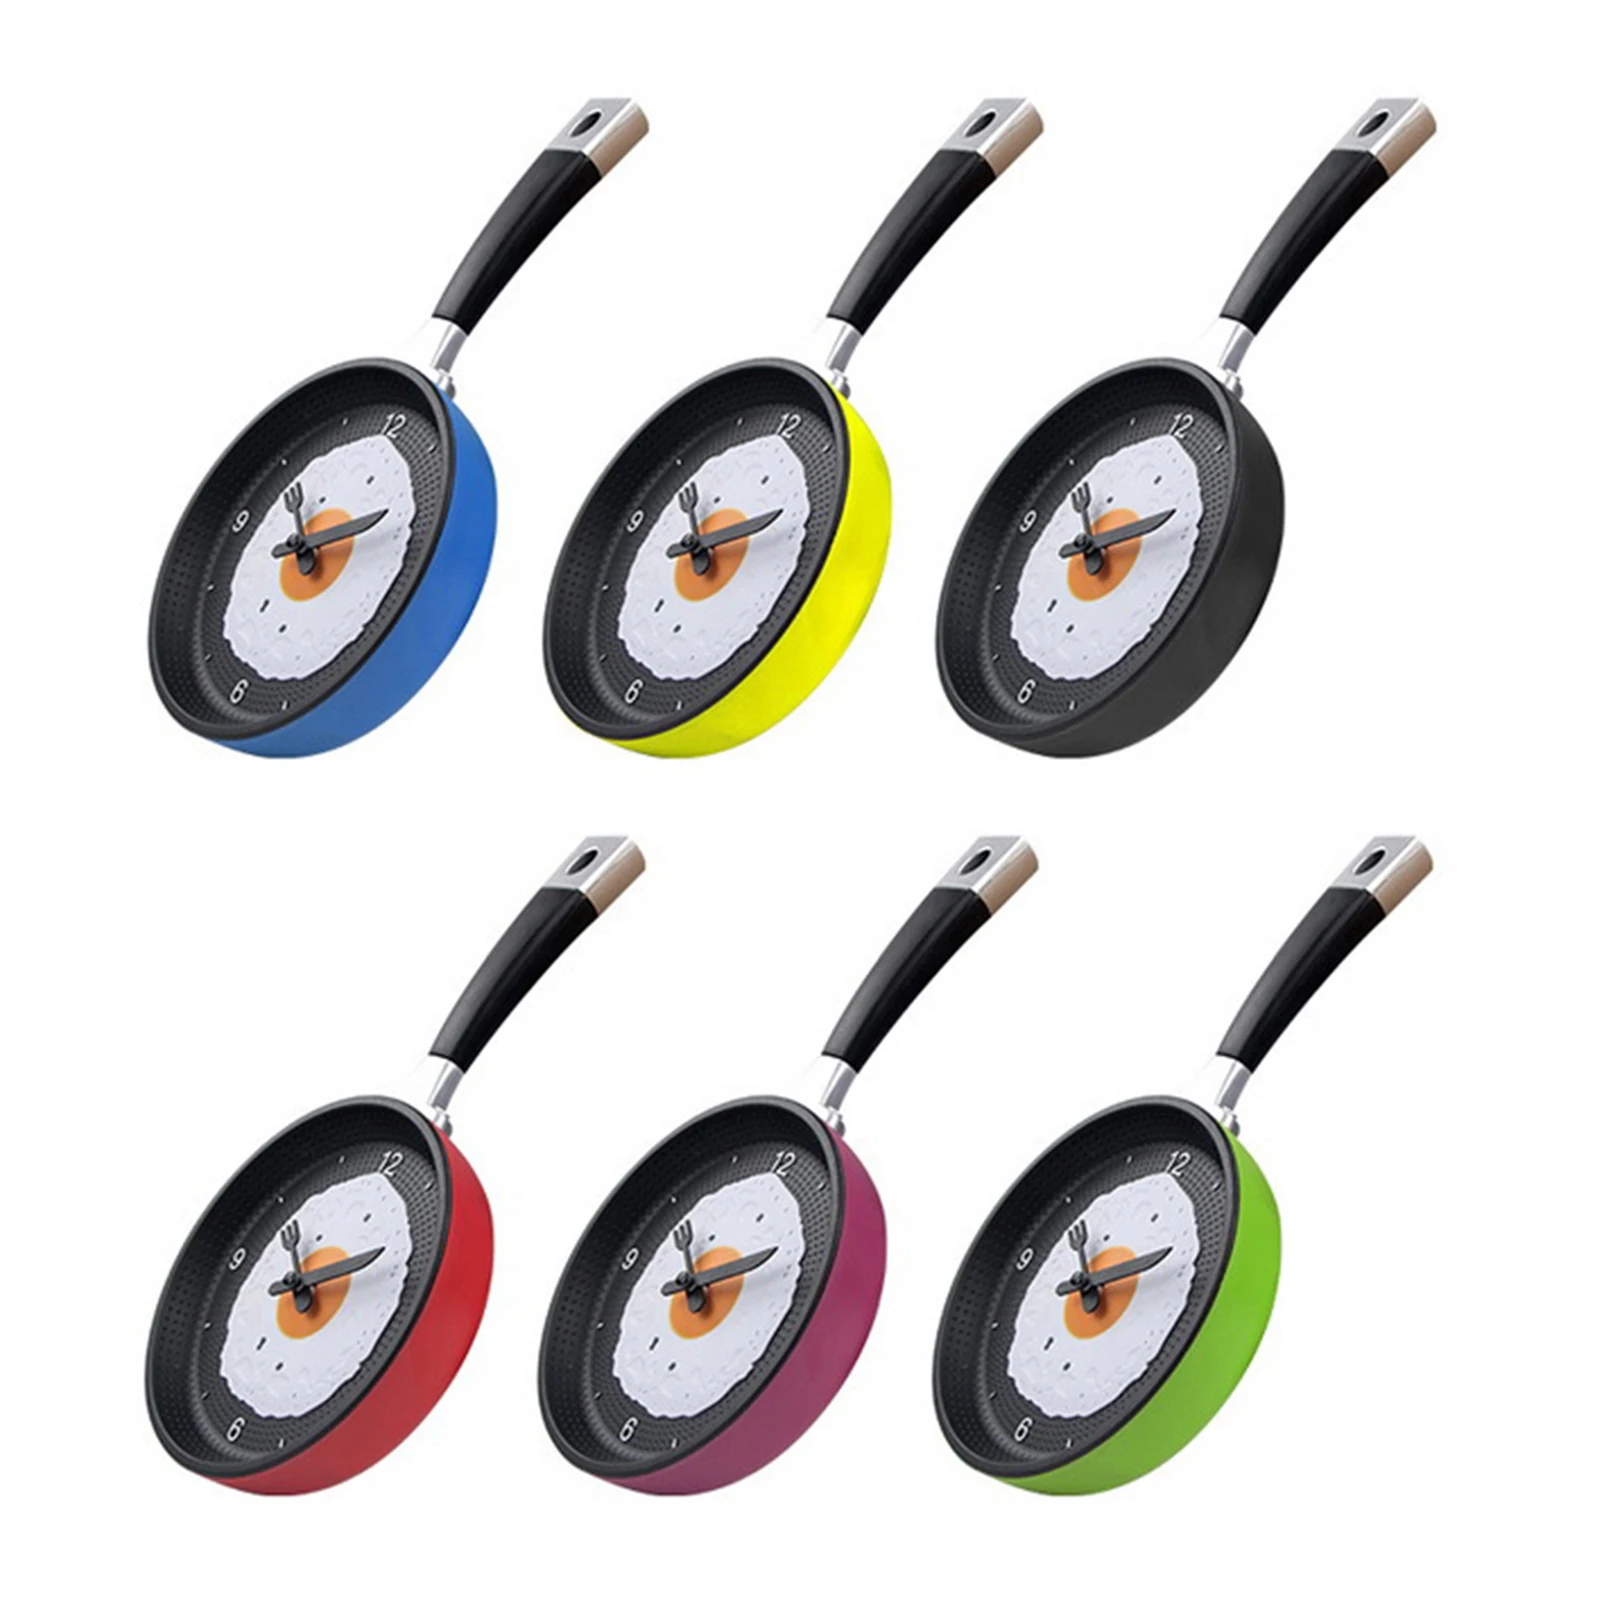 Frying Pan with Fried Egg Shaped Wall Clock, Shabby Chic, Kitchen Themed Unique Wall Clock